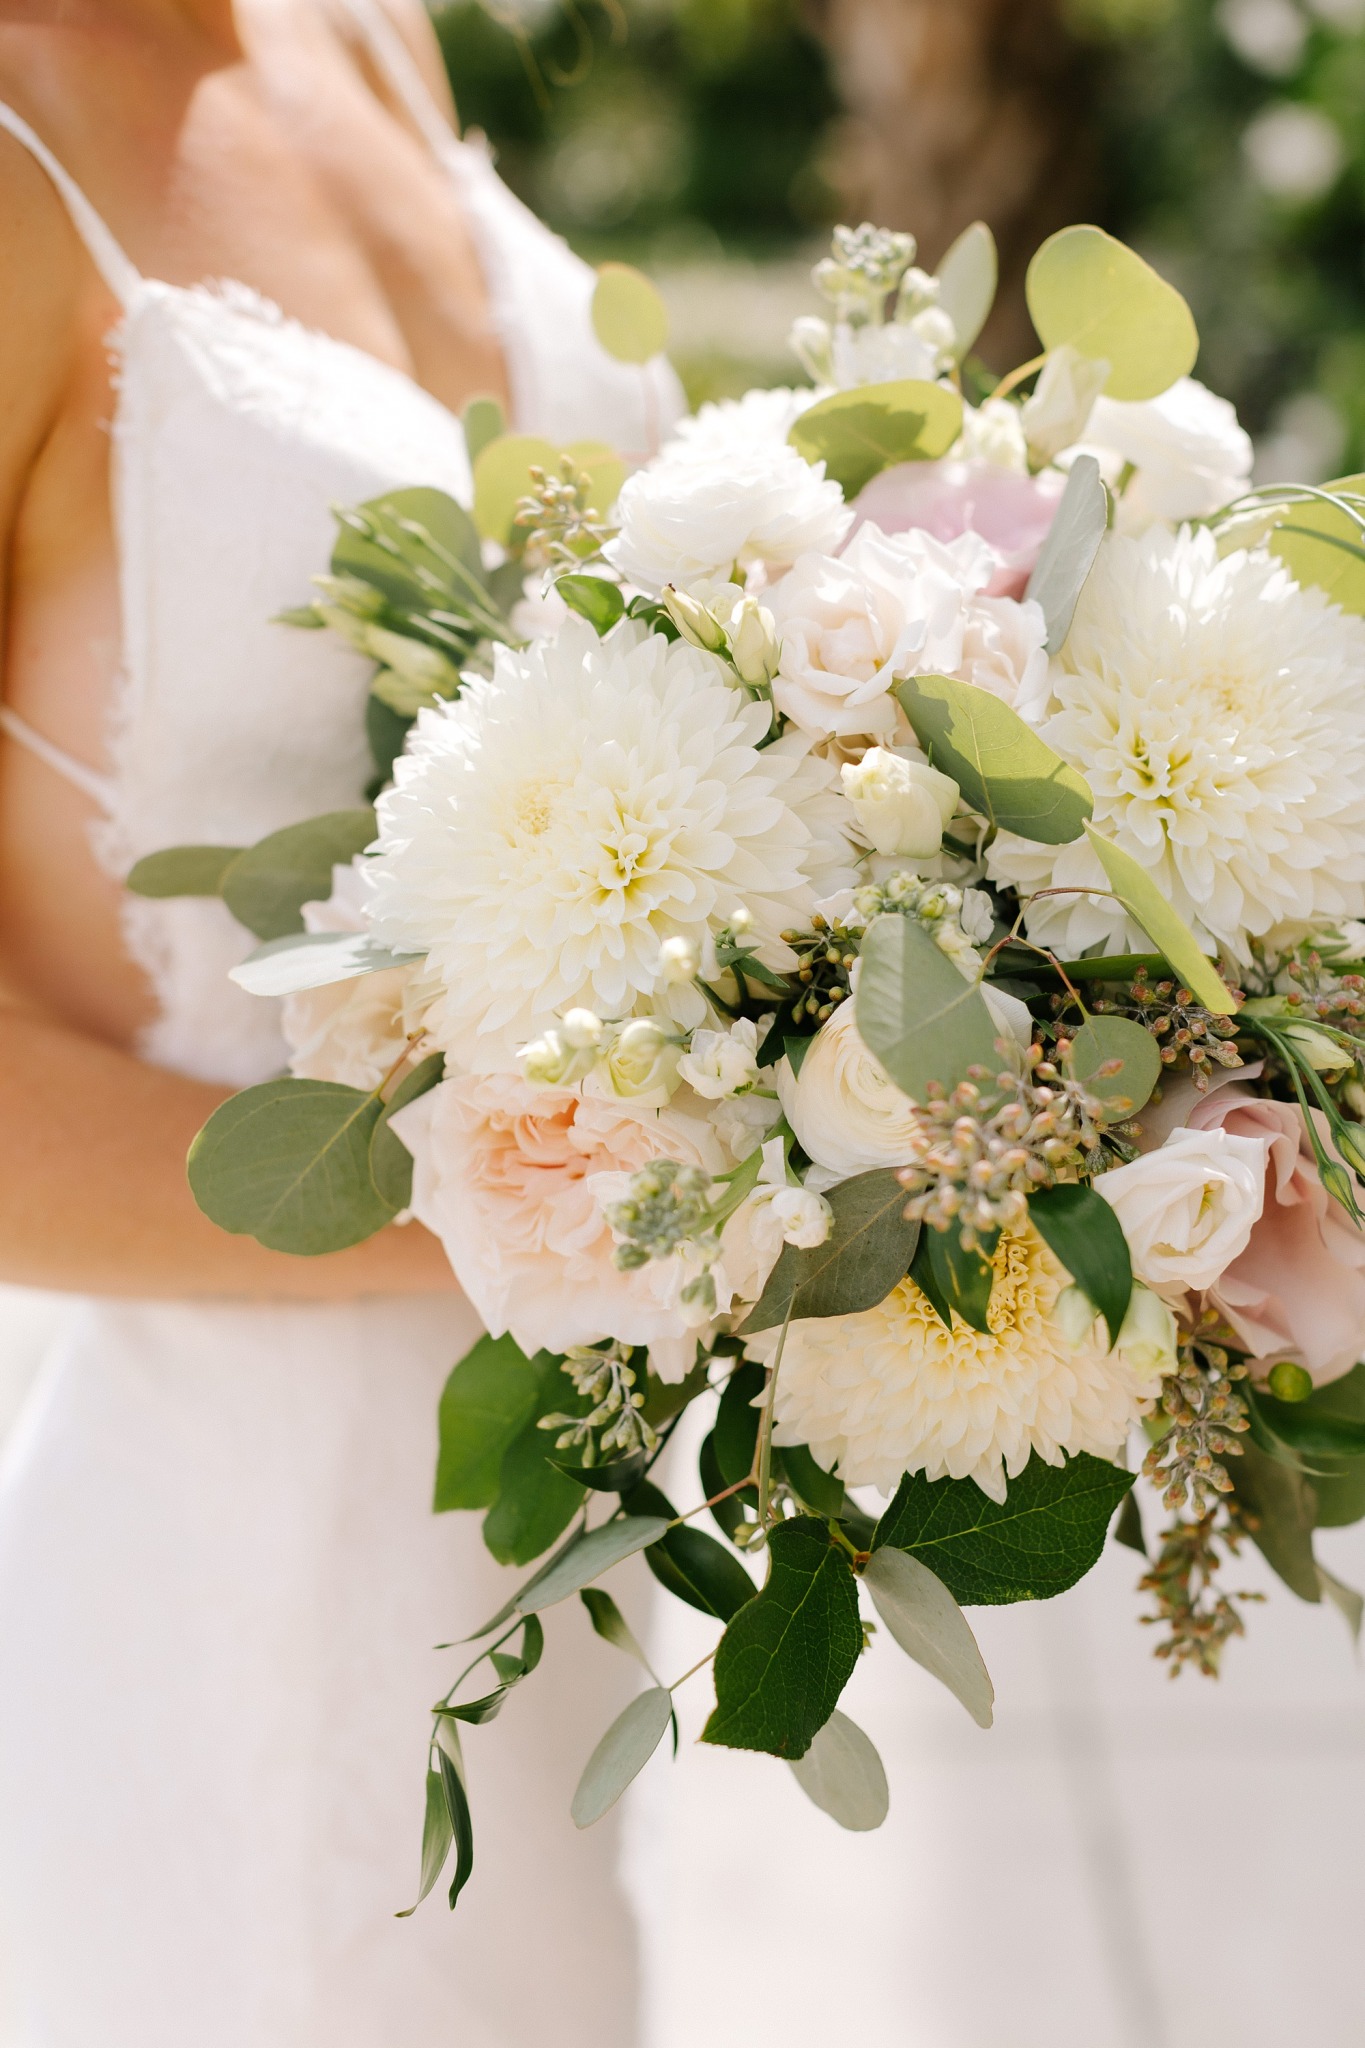 bride's bouquet of white and pale pink flowers